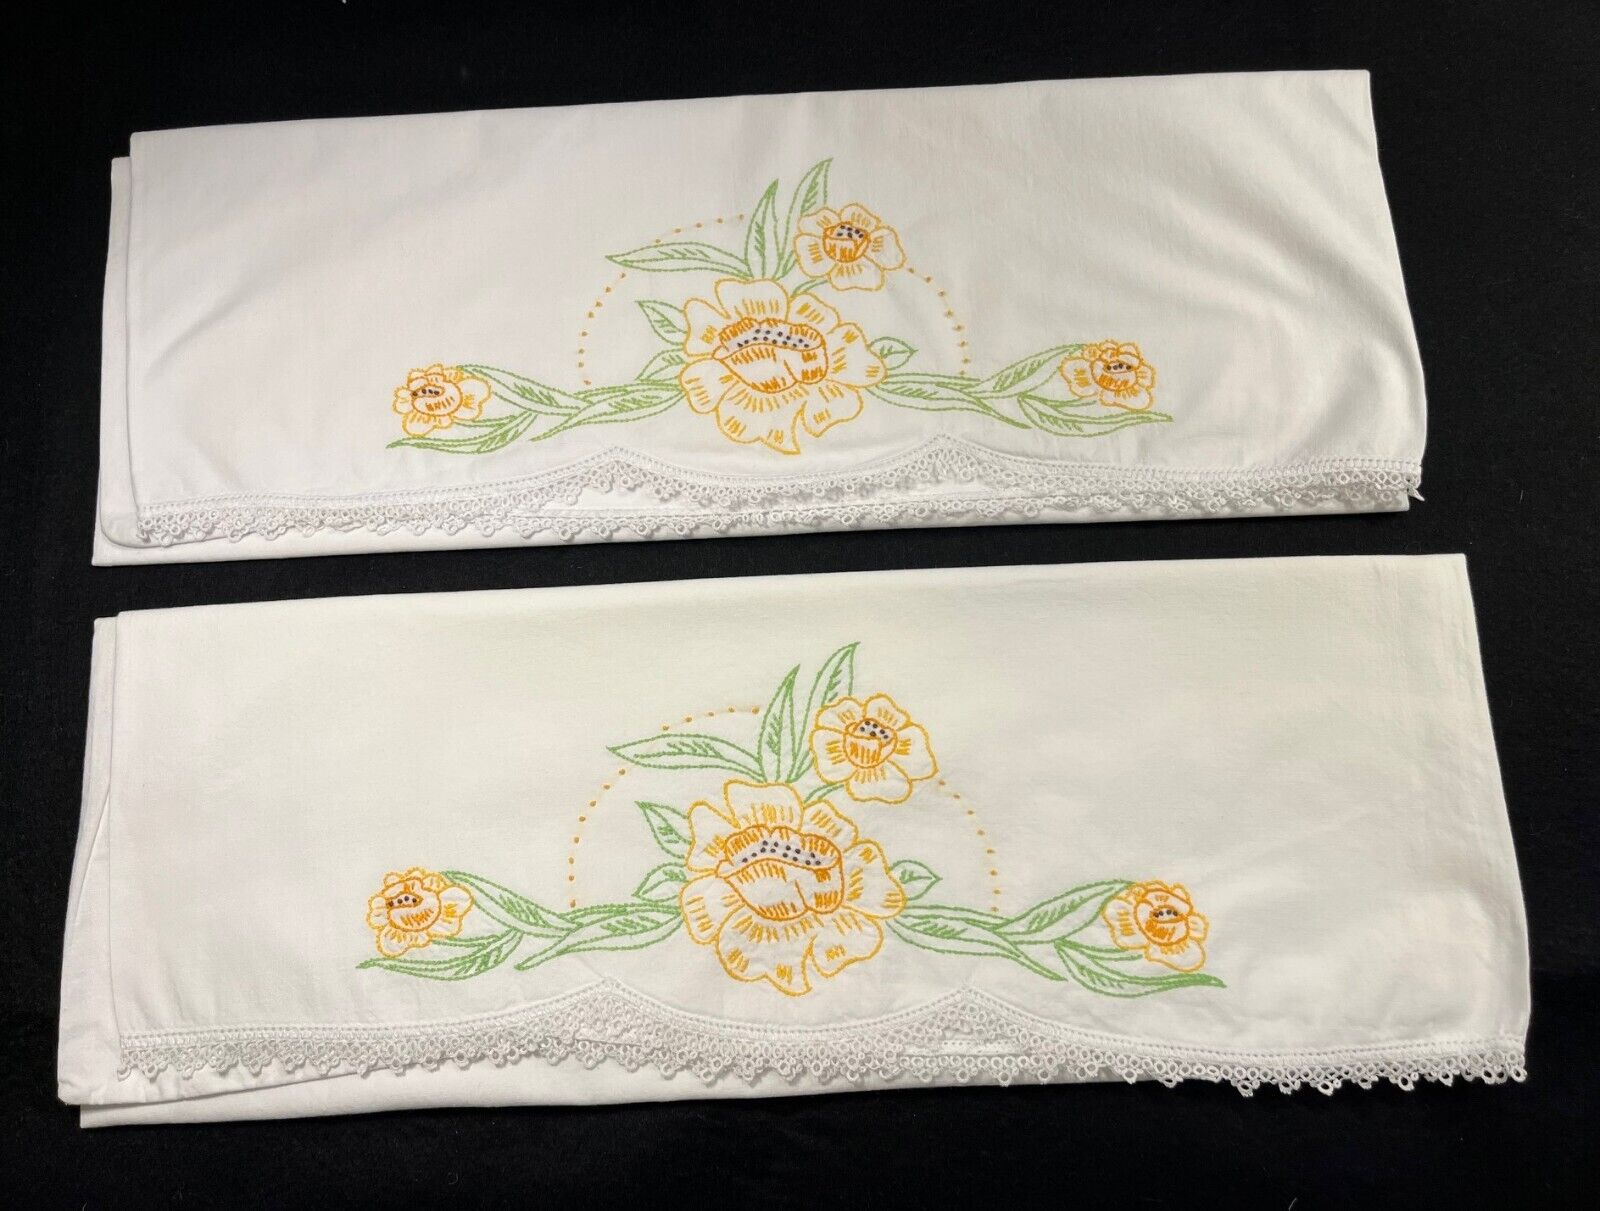 Pair of Vintage Floral Embroidered Pillowcases w/ Crocheted Edges